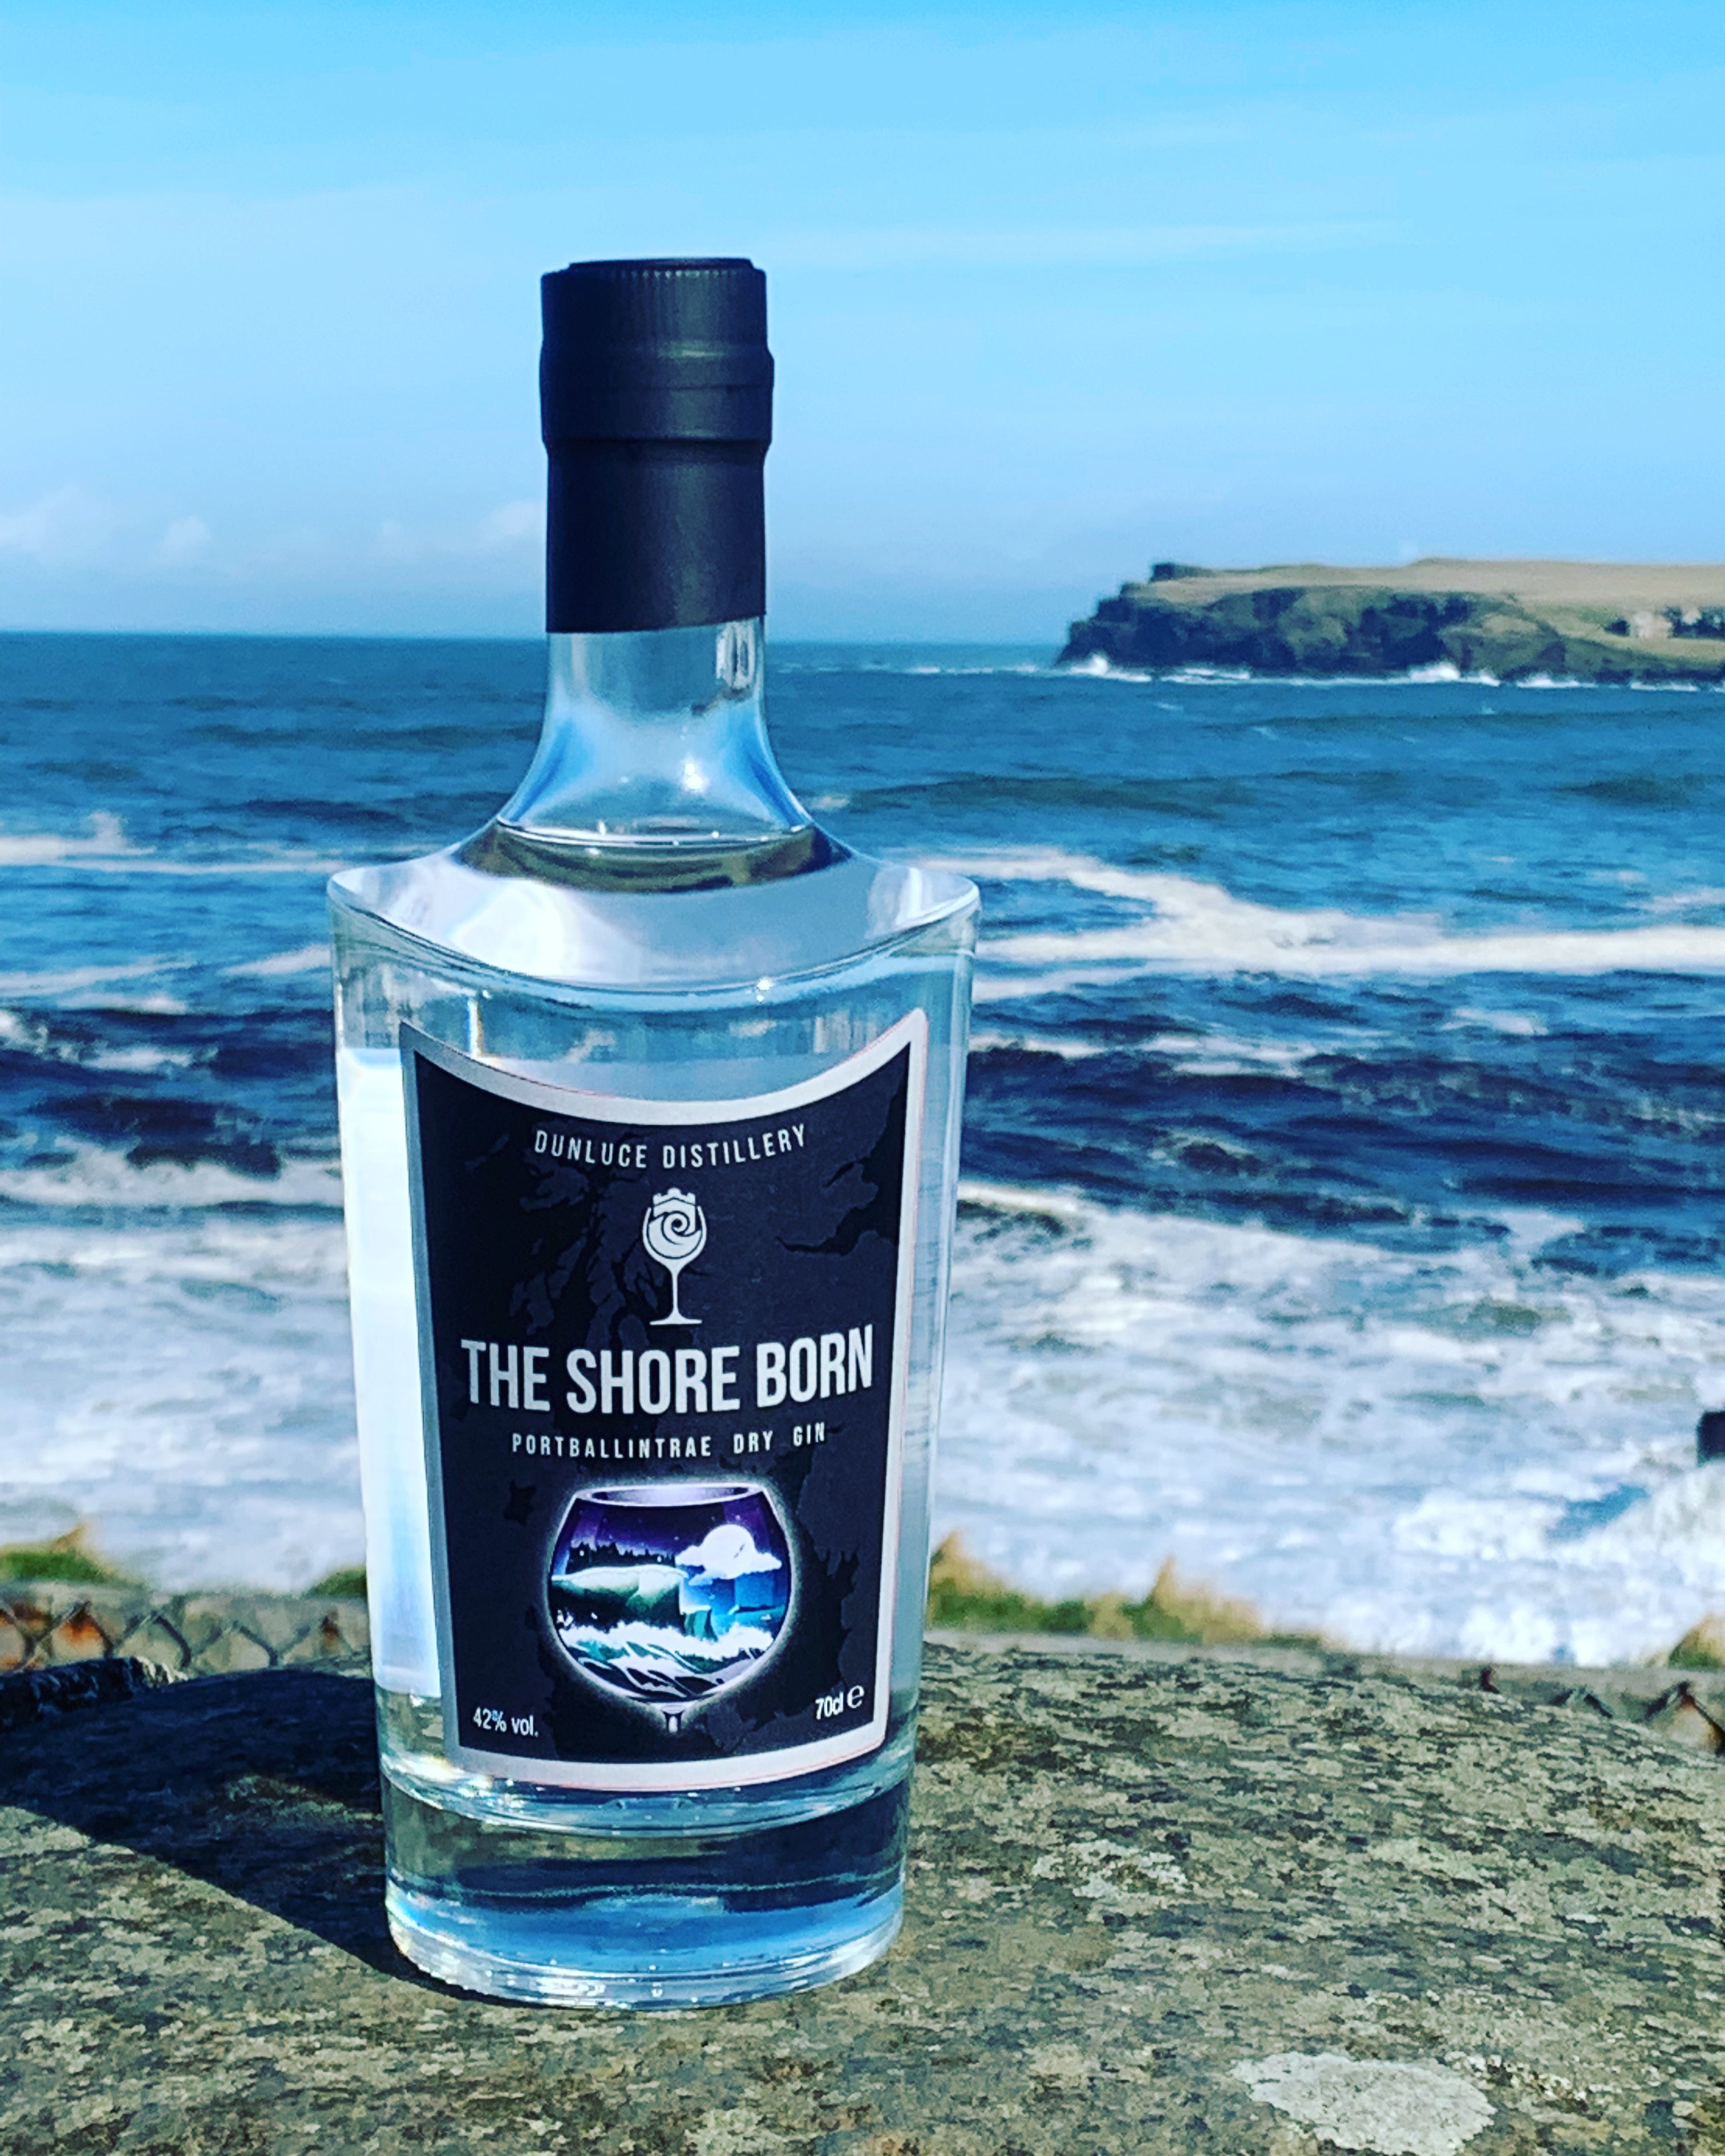 The Shore Born Portballintrae Gin with Runkerry House and Bushfoot Strand